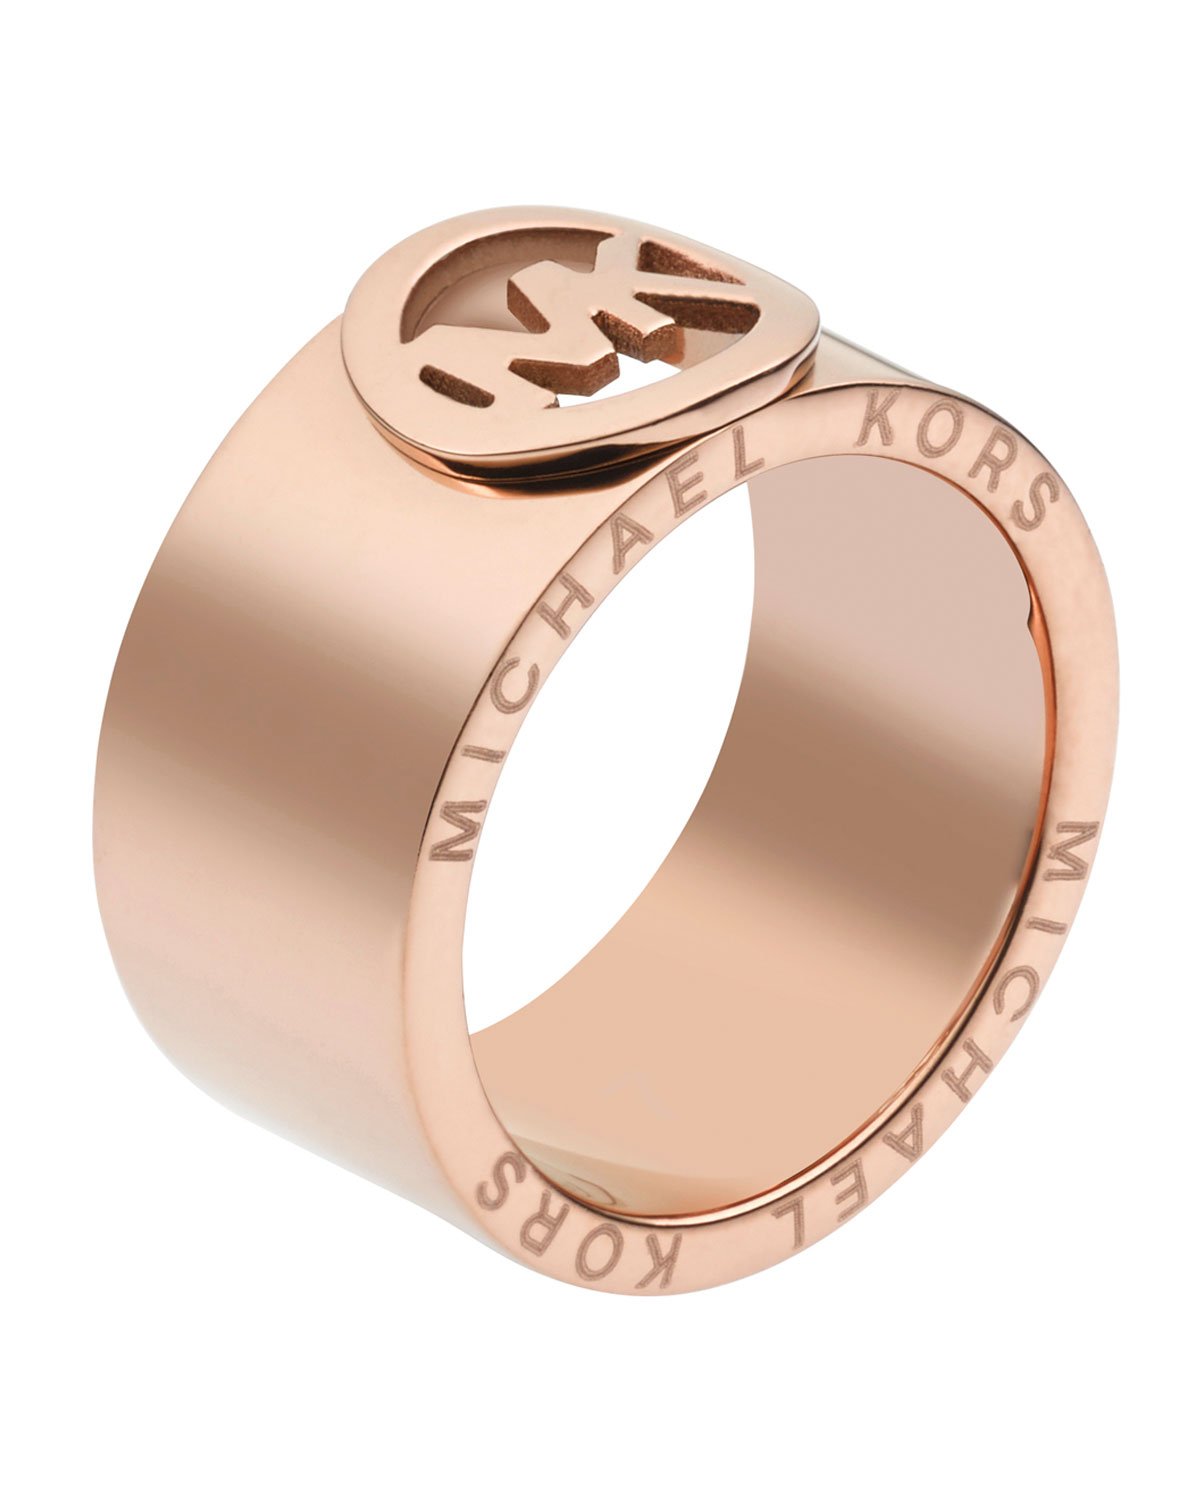 Special offer \u003e mk gold ring, Up to 74% OFF